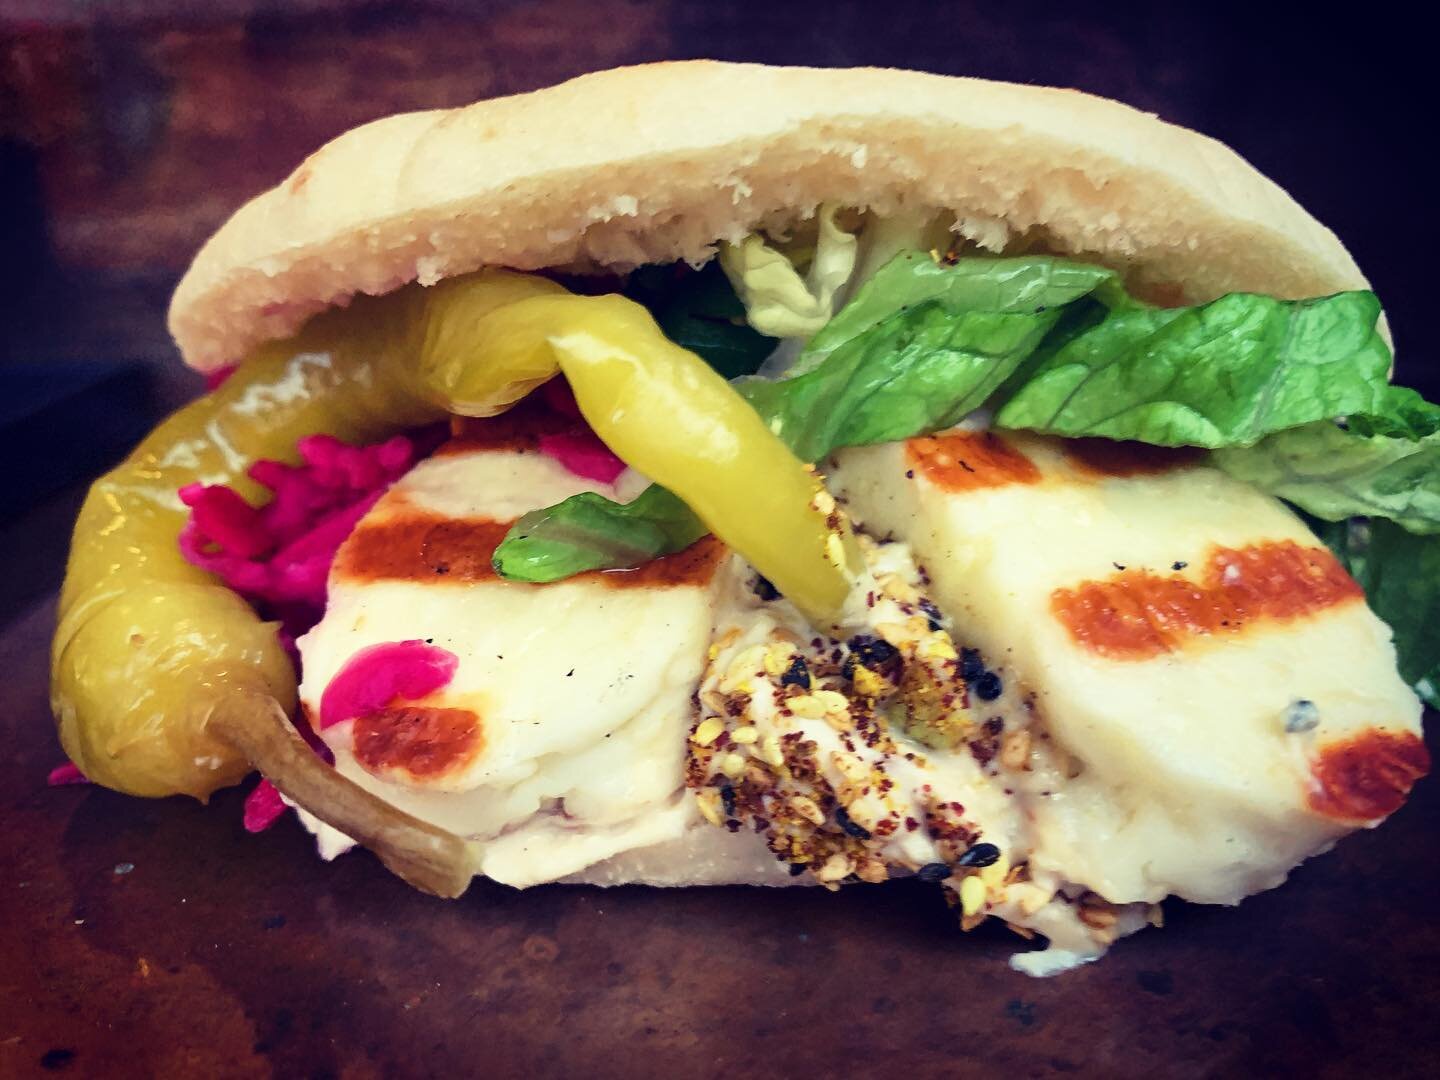 Harbourside Special! For all you halloumi lovers we&rsquo;re bringing our festival favourite halloumi kebab to the Harbourside this weekend @buoystreetfood. Marinated BBQed halloumi, hummus, chilli honey glaze &amp; all our usual salads and toppings.